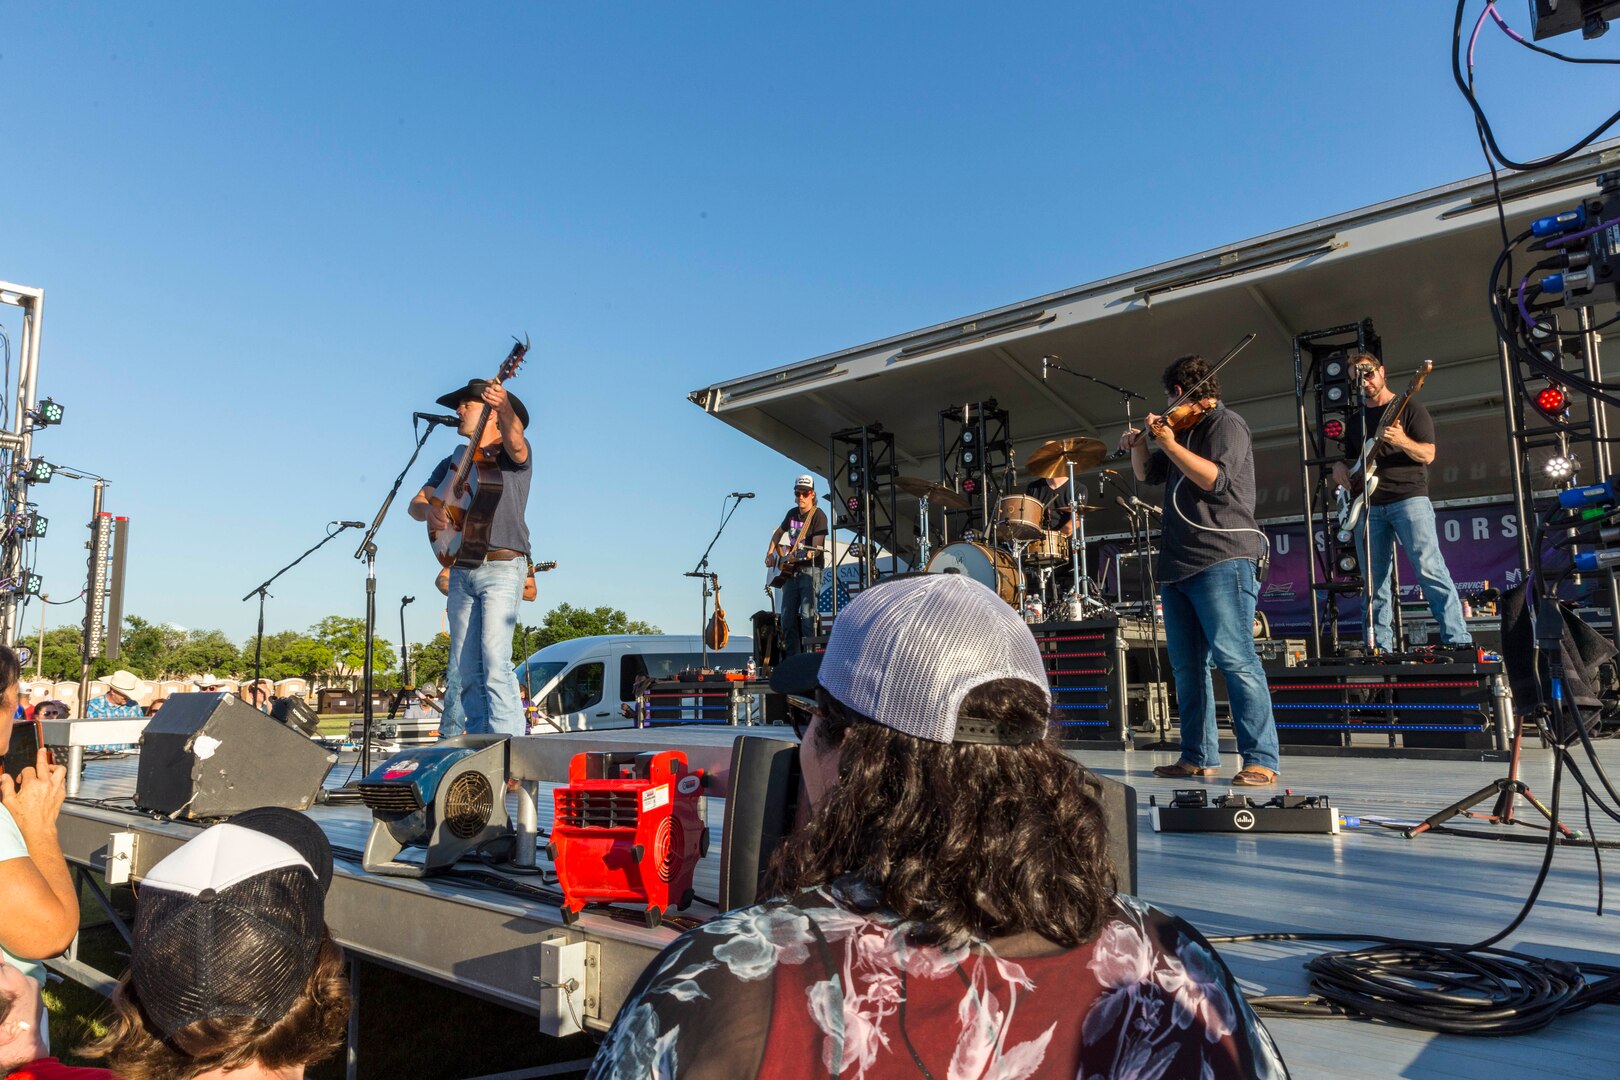 Team Joint Base San Antonio and community members attend an Aaron Watson concert during the annual Military Appreciation Weekend May 6, 2017 at Joint Base San Antonio-Fort Sam Houston, Texas. U.S. Army North and JBSA hosted the two-day event, which featured music, family activities, and various military demonstrations. This year, the appreciation weekend also commemorated the 300th anniversary for the city of San Antonio. (U.S. Air Force photo by Ismael Ortega / Released)